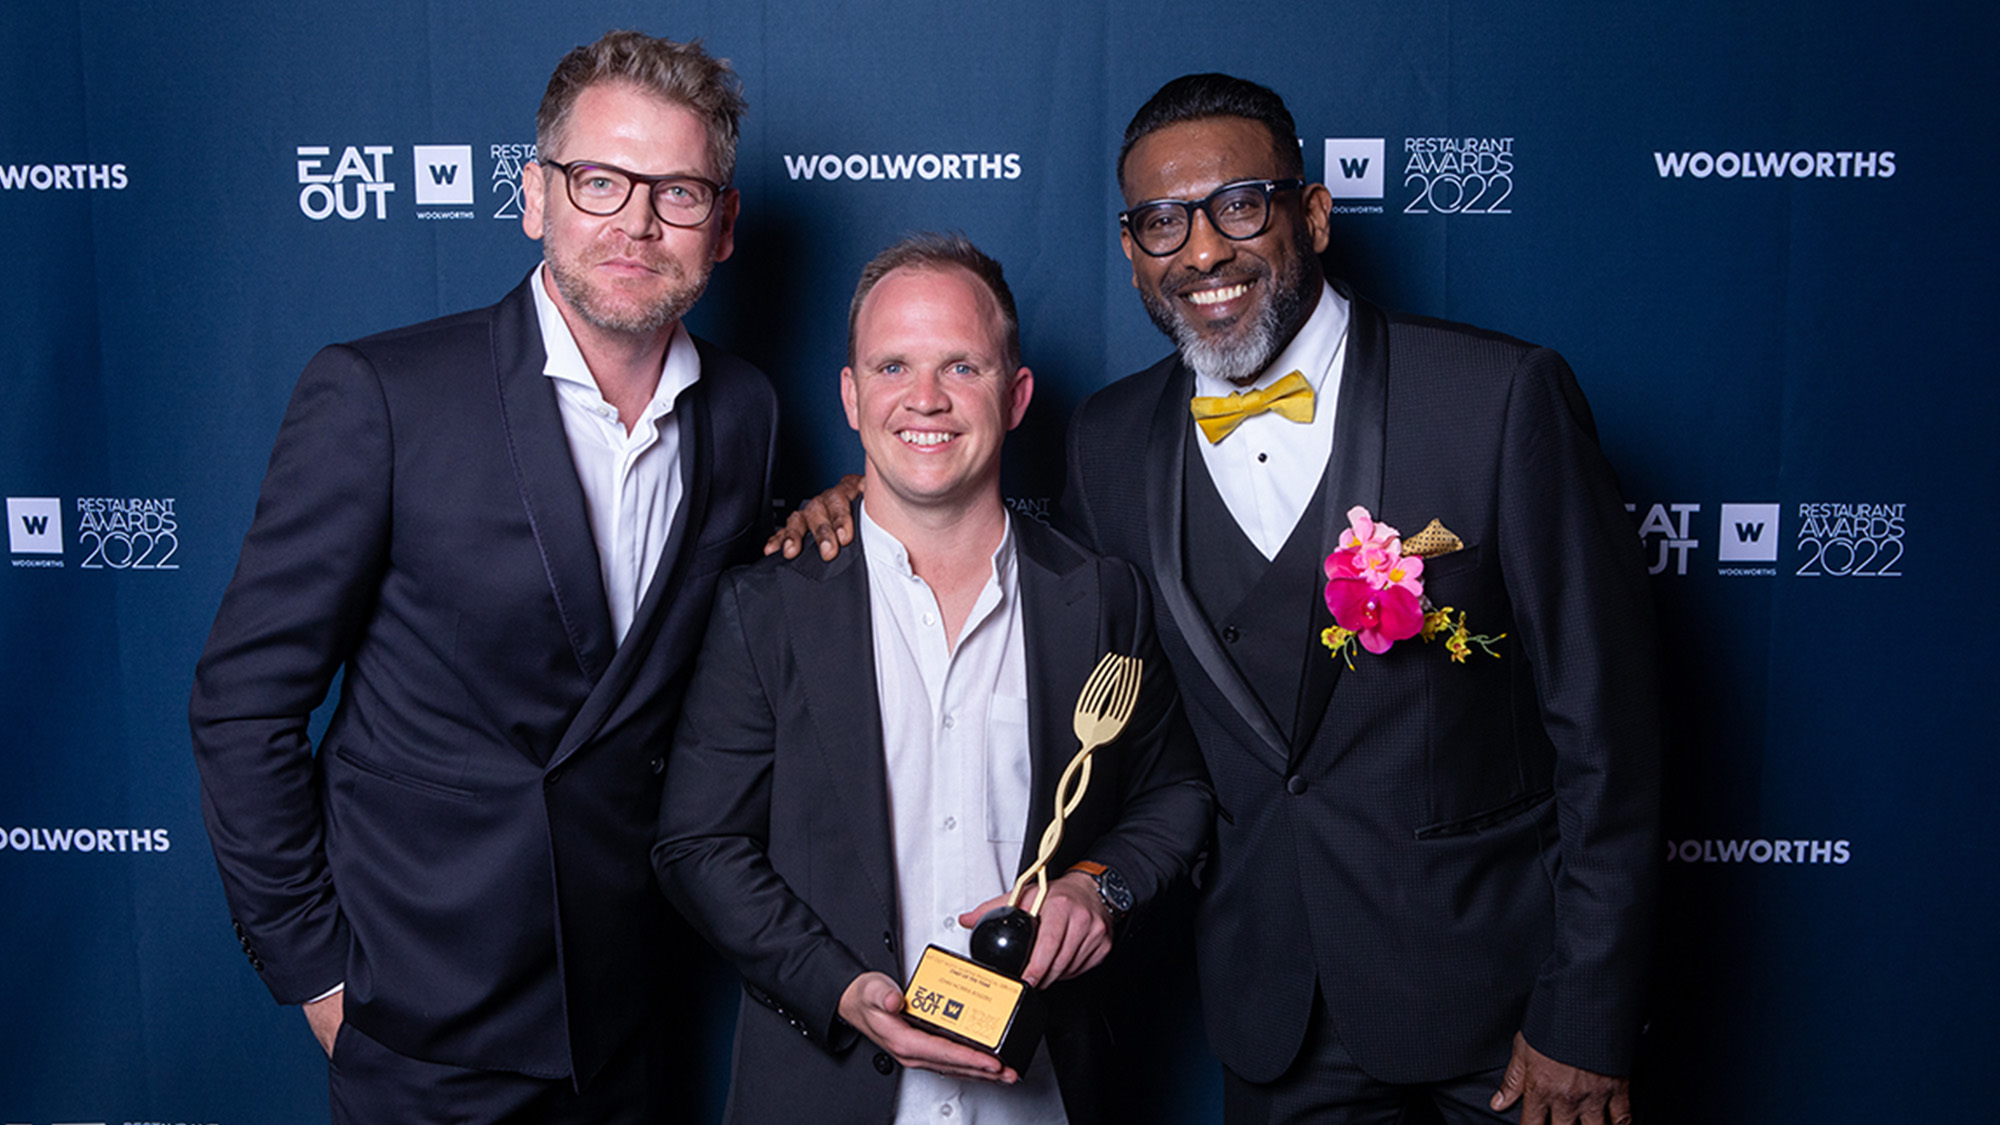 2022 Eat Out Woolworths Restaurant Awards